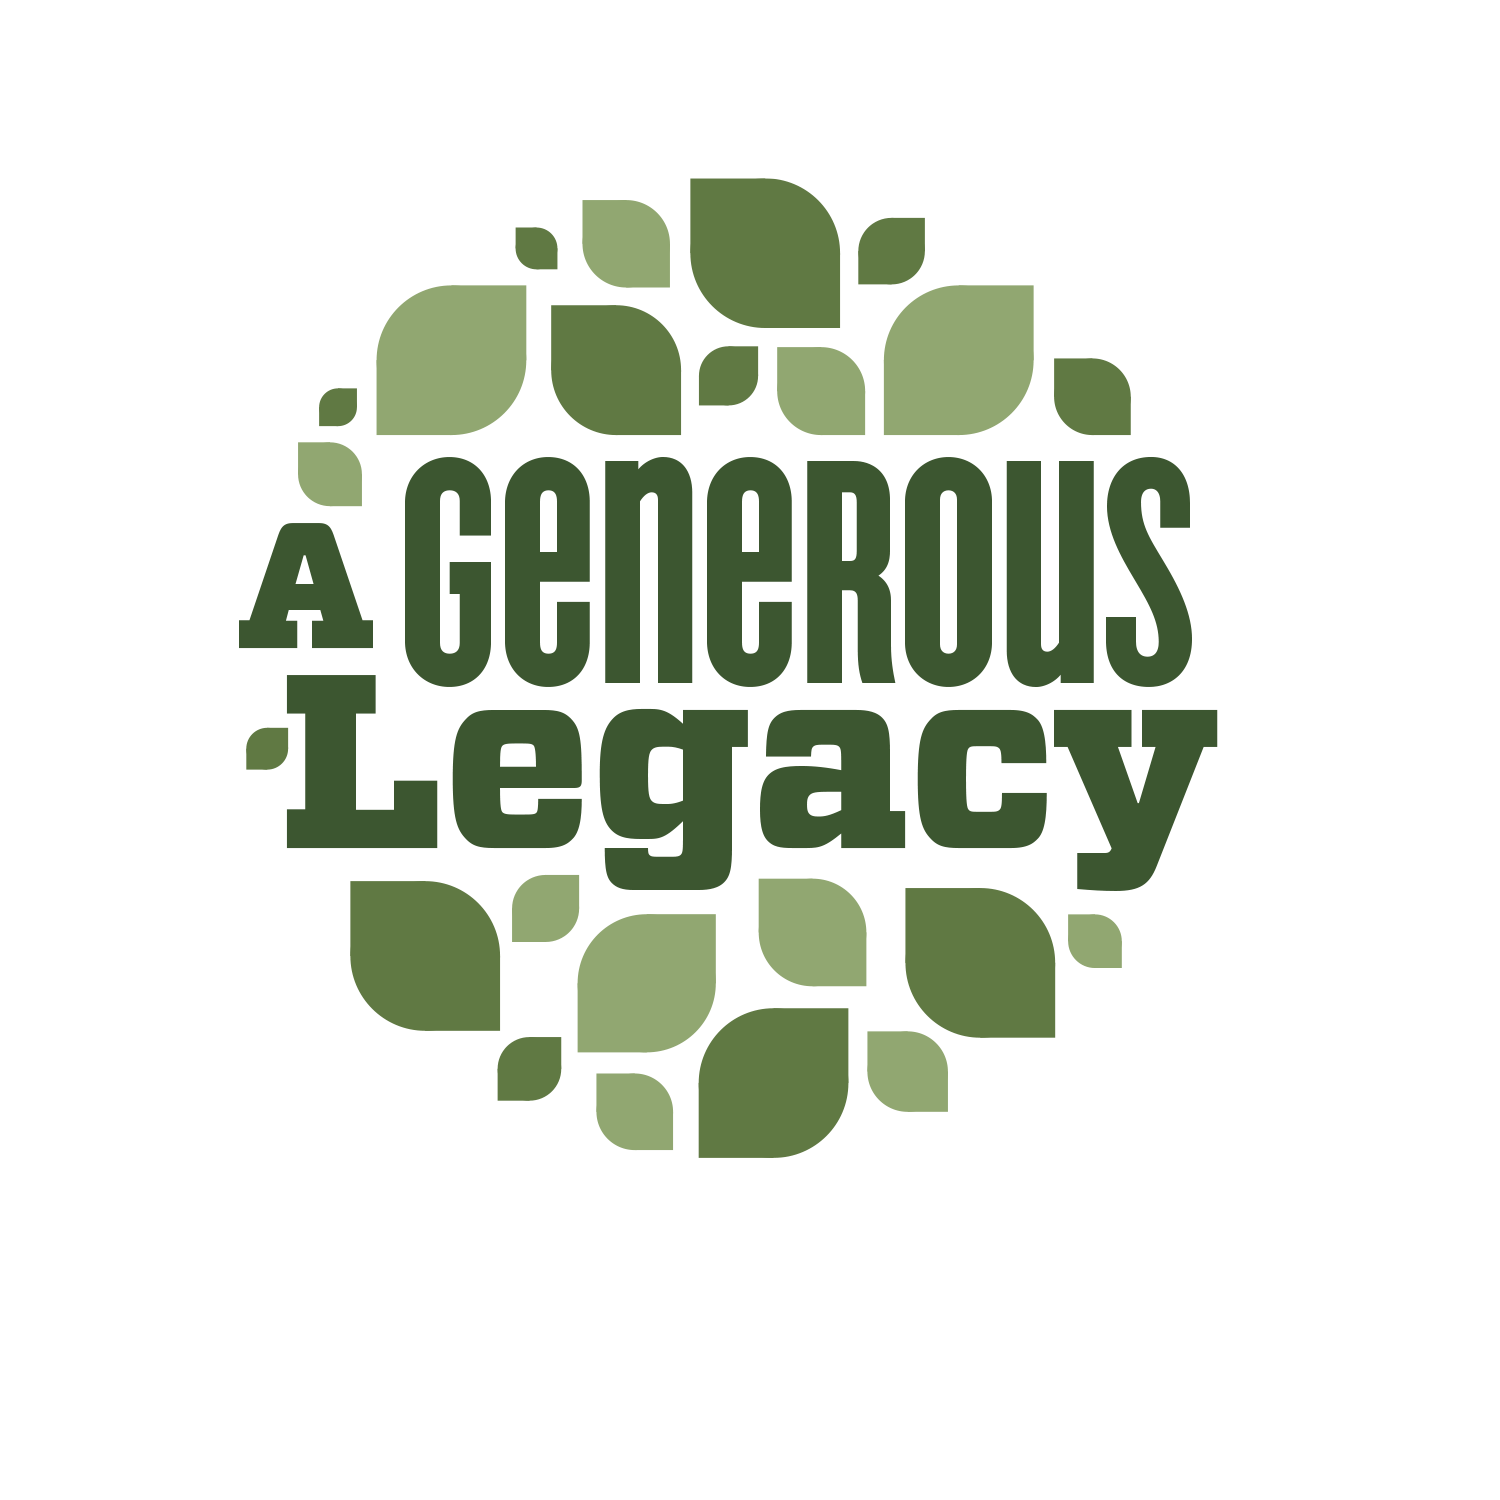 Stylized treatment of the text "A Generous Legacy"